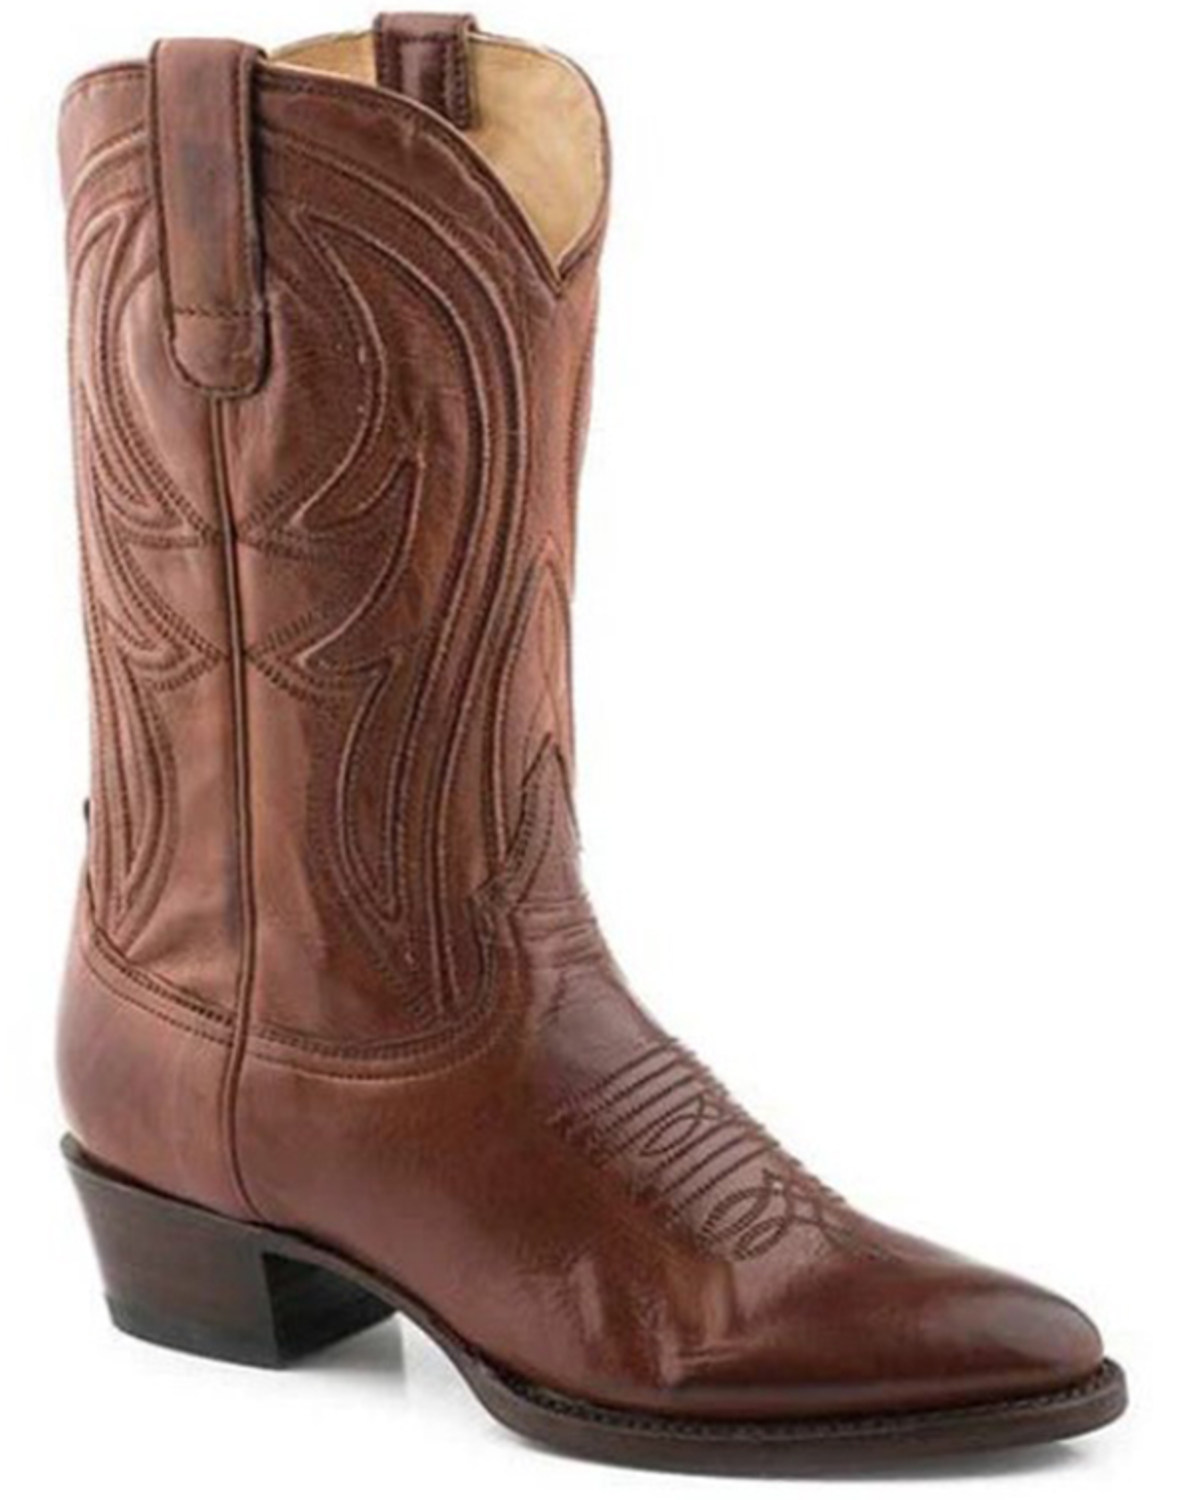 Stetson Women's Nora Western Boots - Pointed Toe